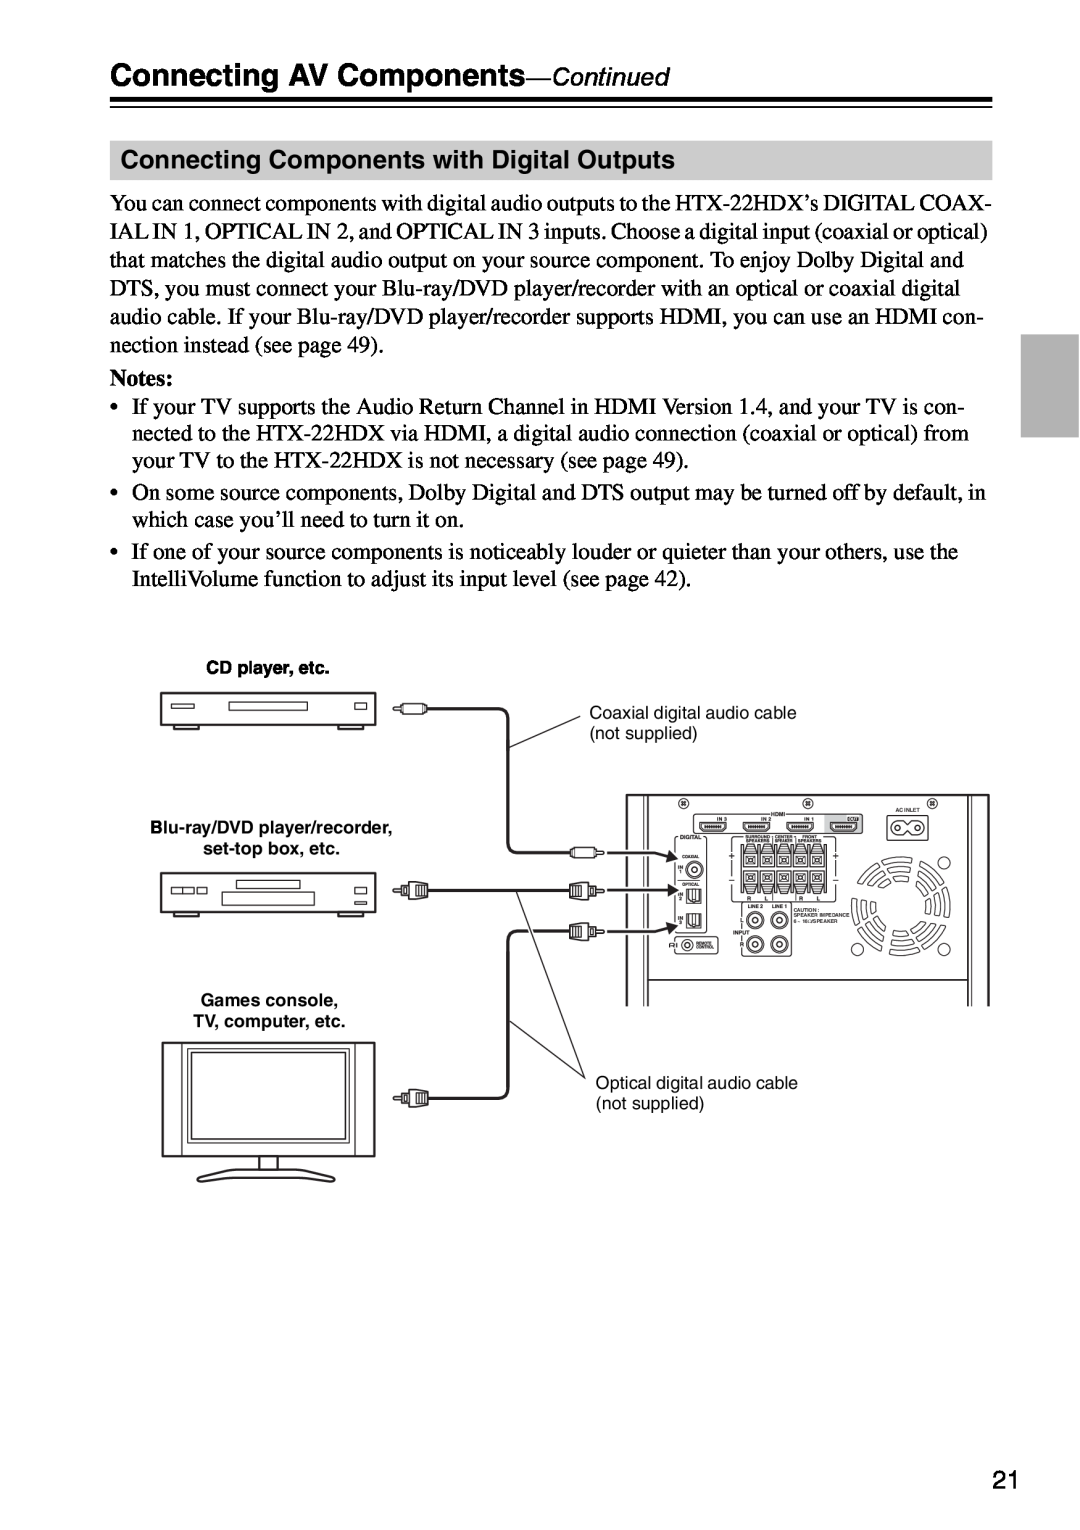 Onkyo HTX-22HDXST Connecting Components with Digital Outputs, Connecting AV Components-Continued, CD player, etc 